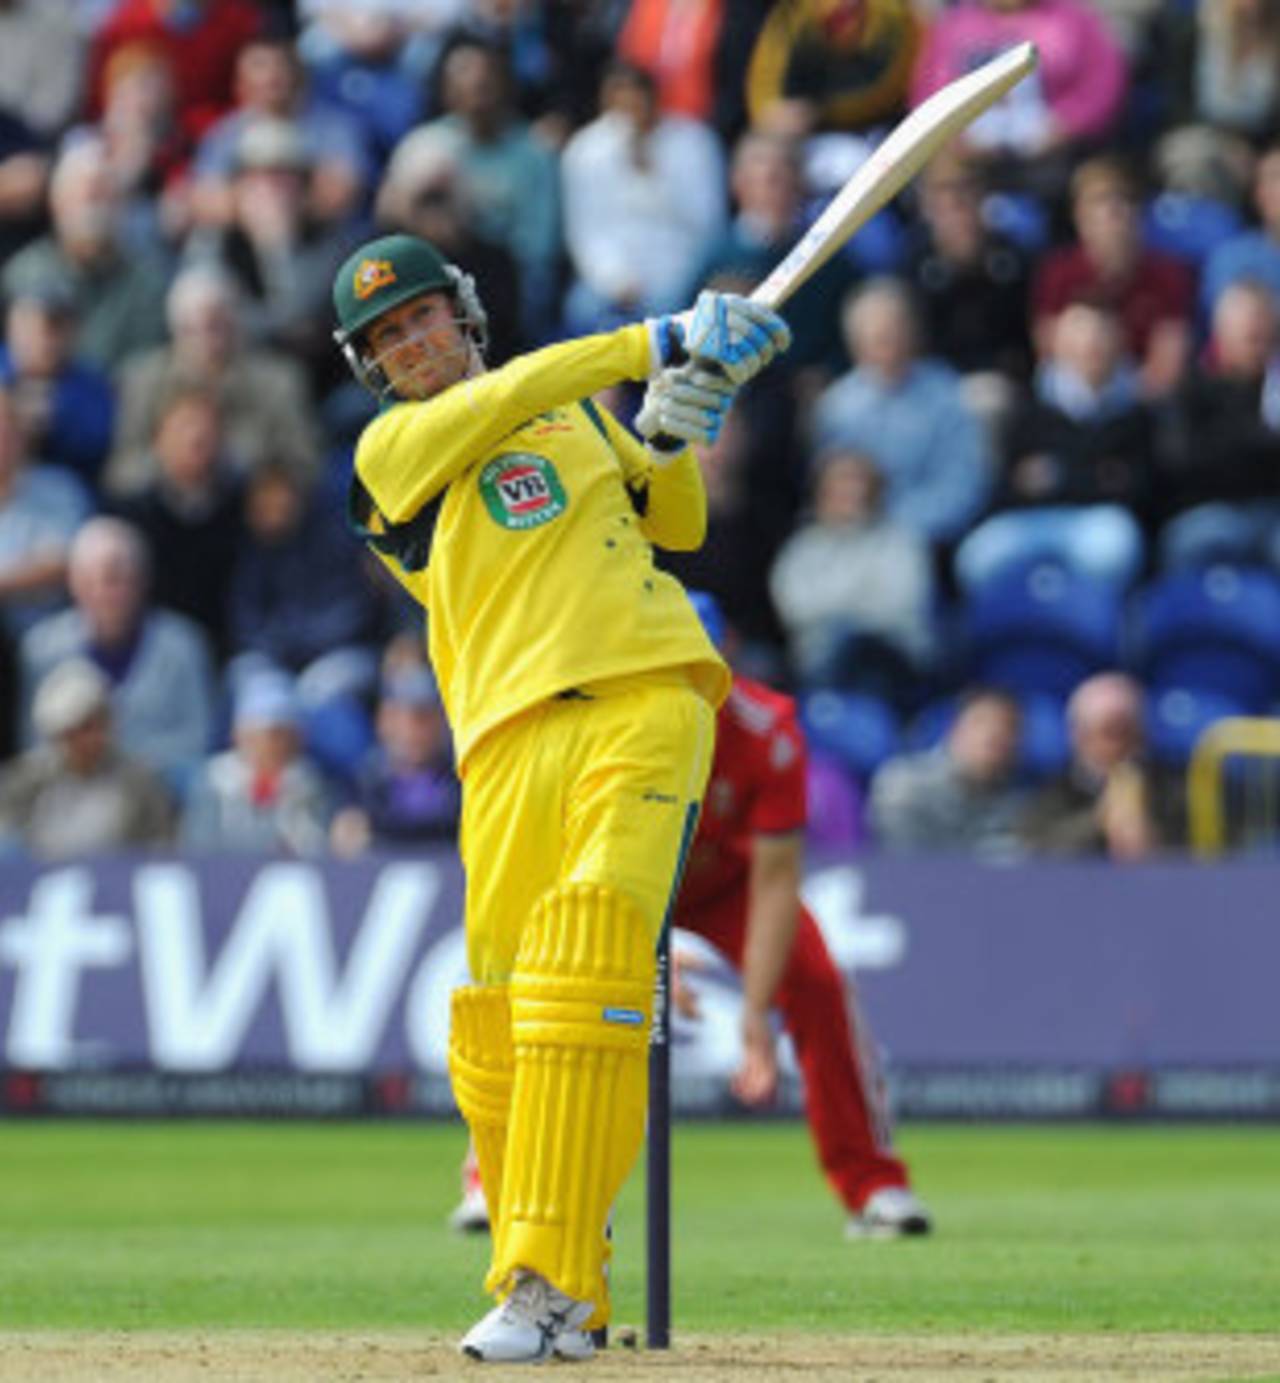 Michael Clarke tried to improve Australia's position with aggression, England v Australia, 4th NatWest ODI, Cardiff, September, 14, 2013